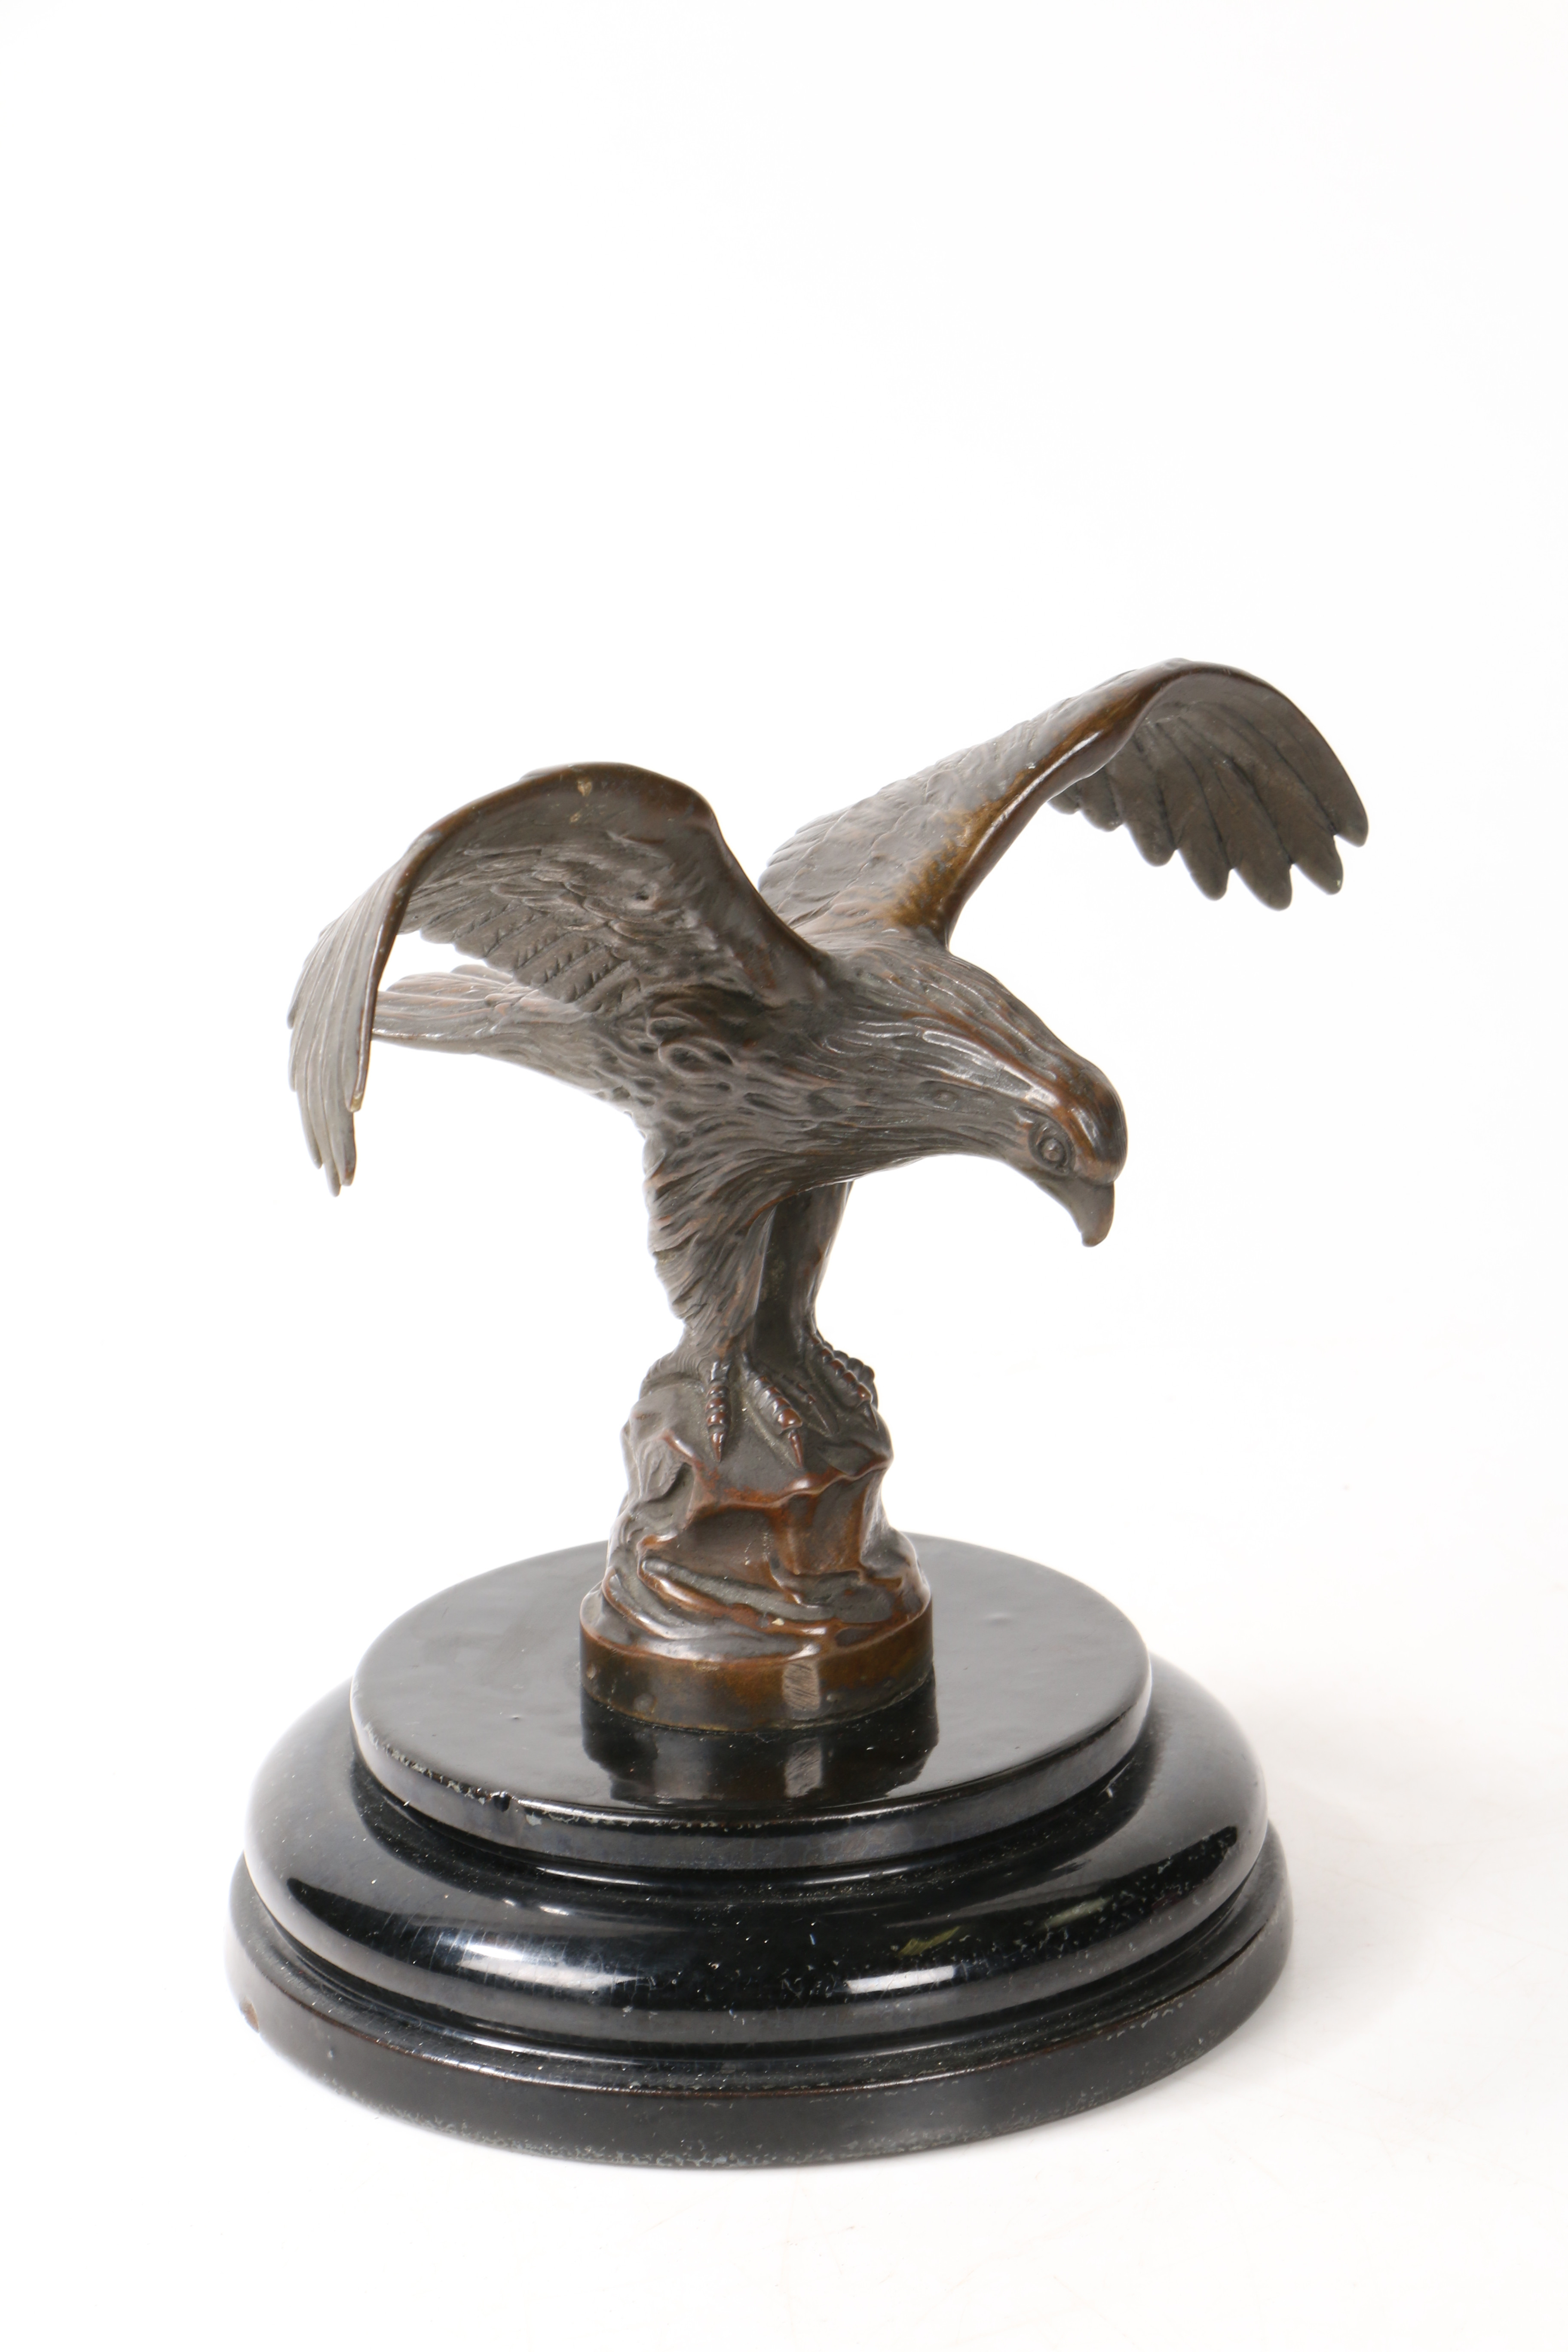 A LATE 19TH/ EARLY 20TH CENTURY BRONZE SCULPTURE OF A EAGLE. - Image 4 of 5